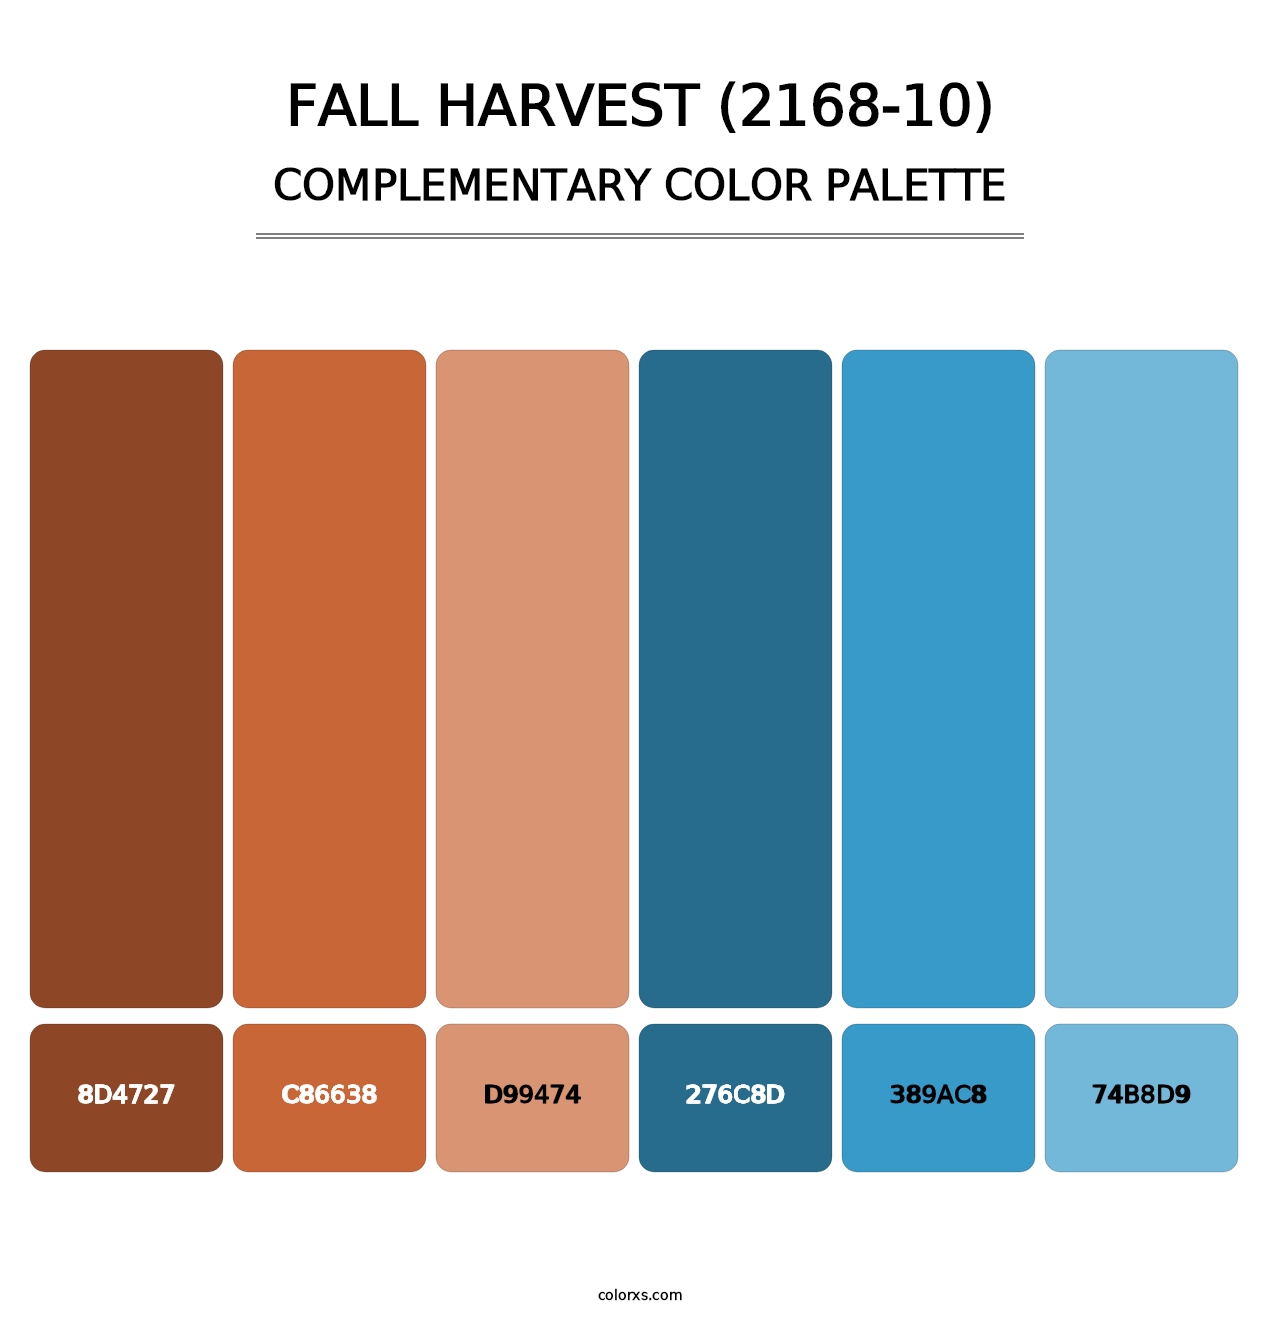 Fall Harvest (2168-10) - Complementary Color Palette